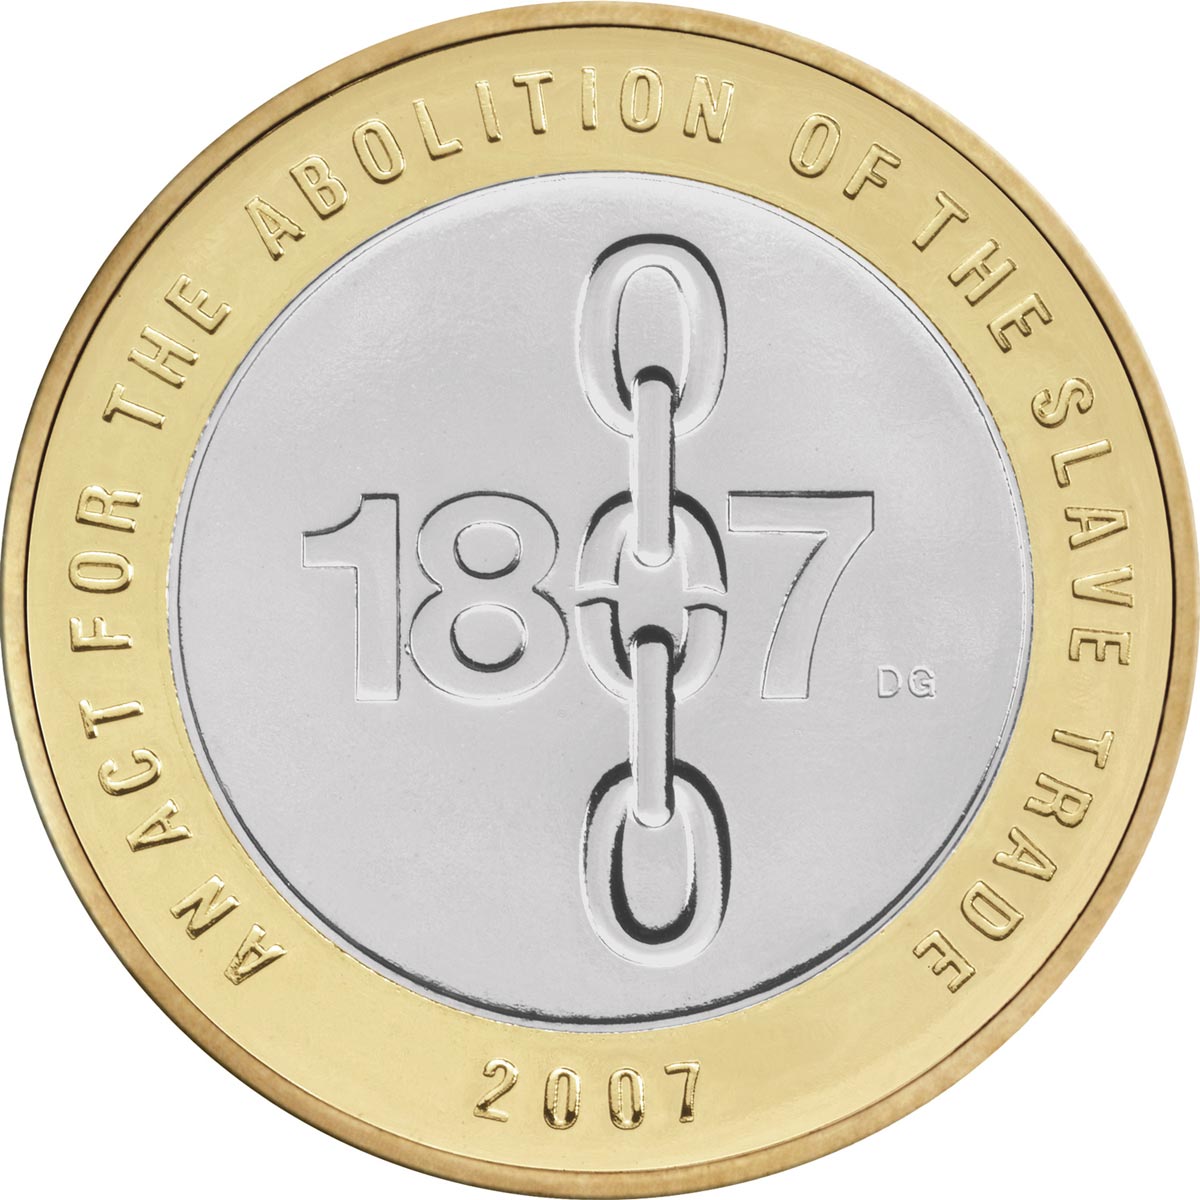 Image of 2 pounds coin - Bicentenary of the abolition of the slave trade in the British Empire | United Kingdom 2007.  The Bimetal: CuNi, nordic gold coin is of Proof, BU, UNC quality.